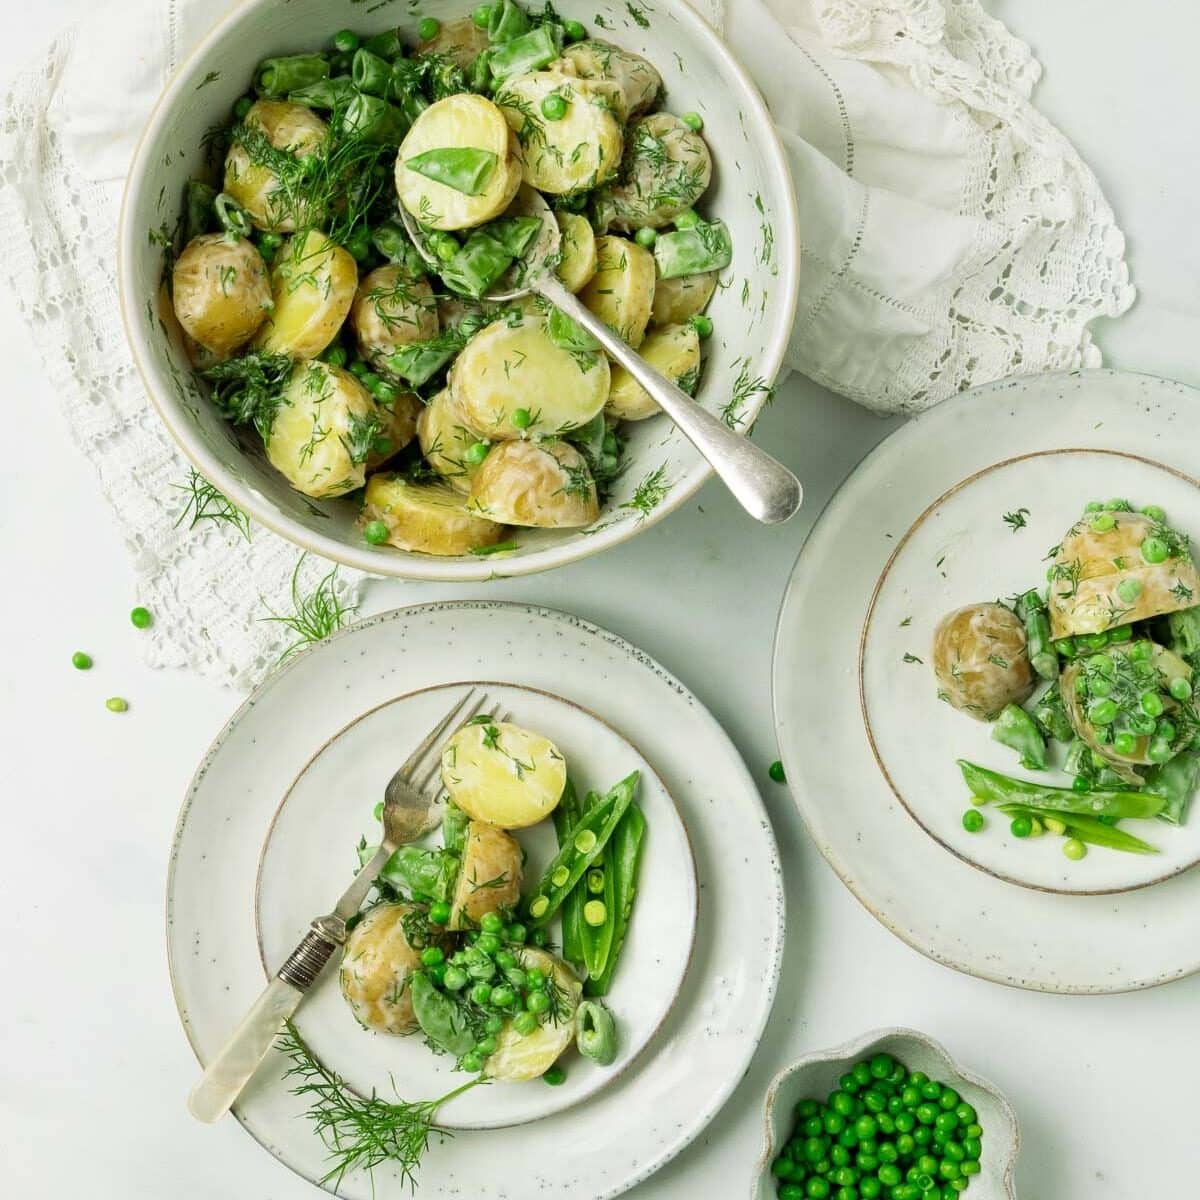 Serving bowl and individual servings of Potato Salad with Dill and Peas.